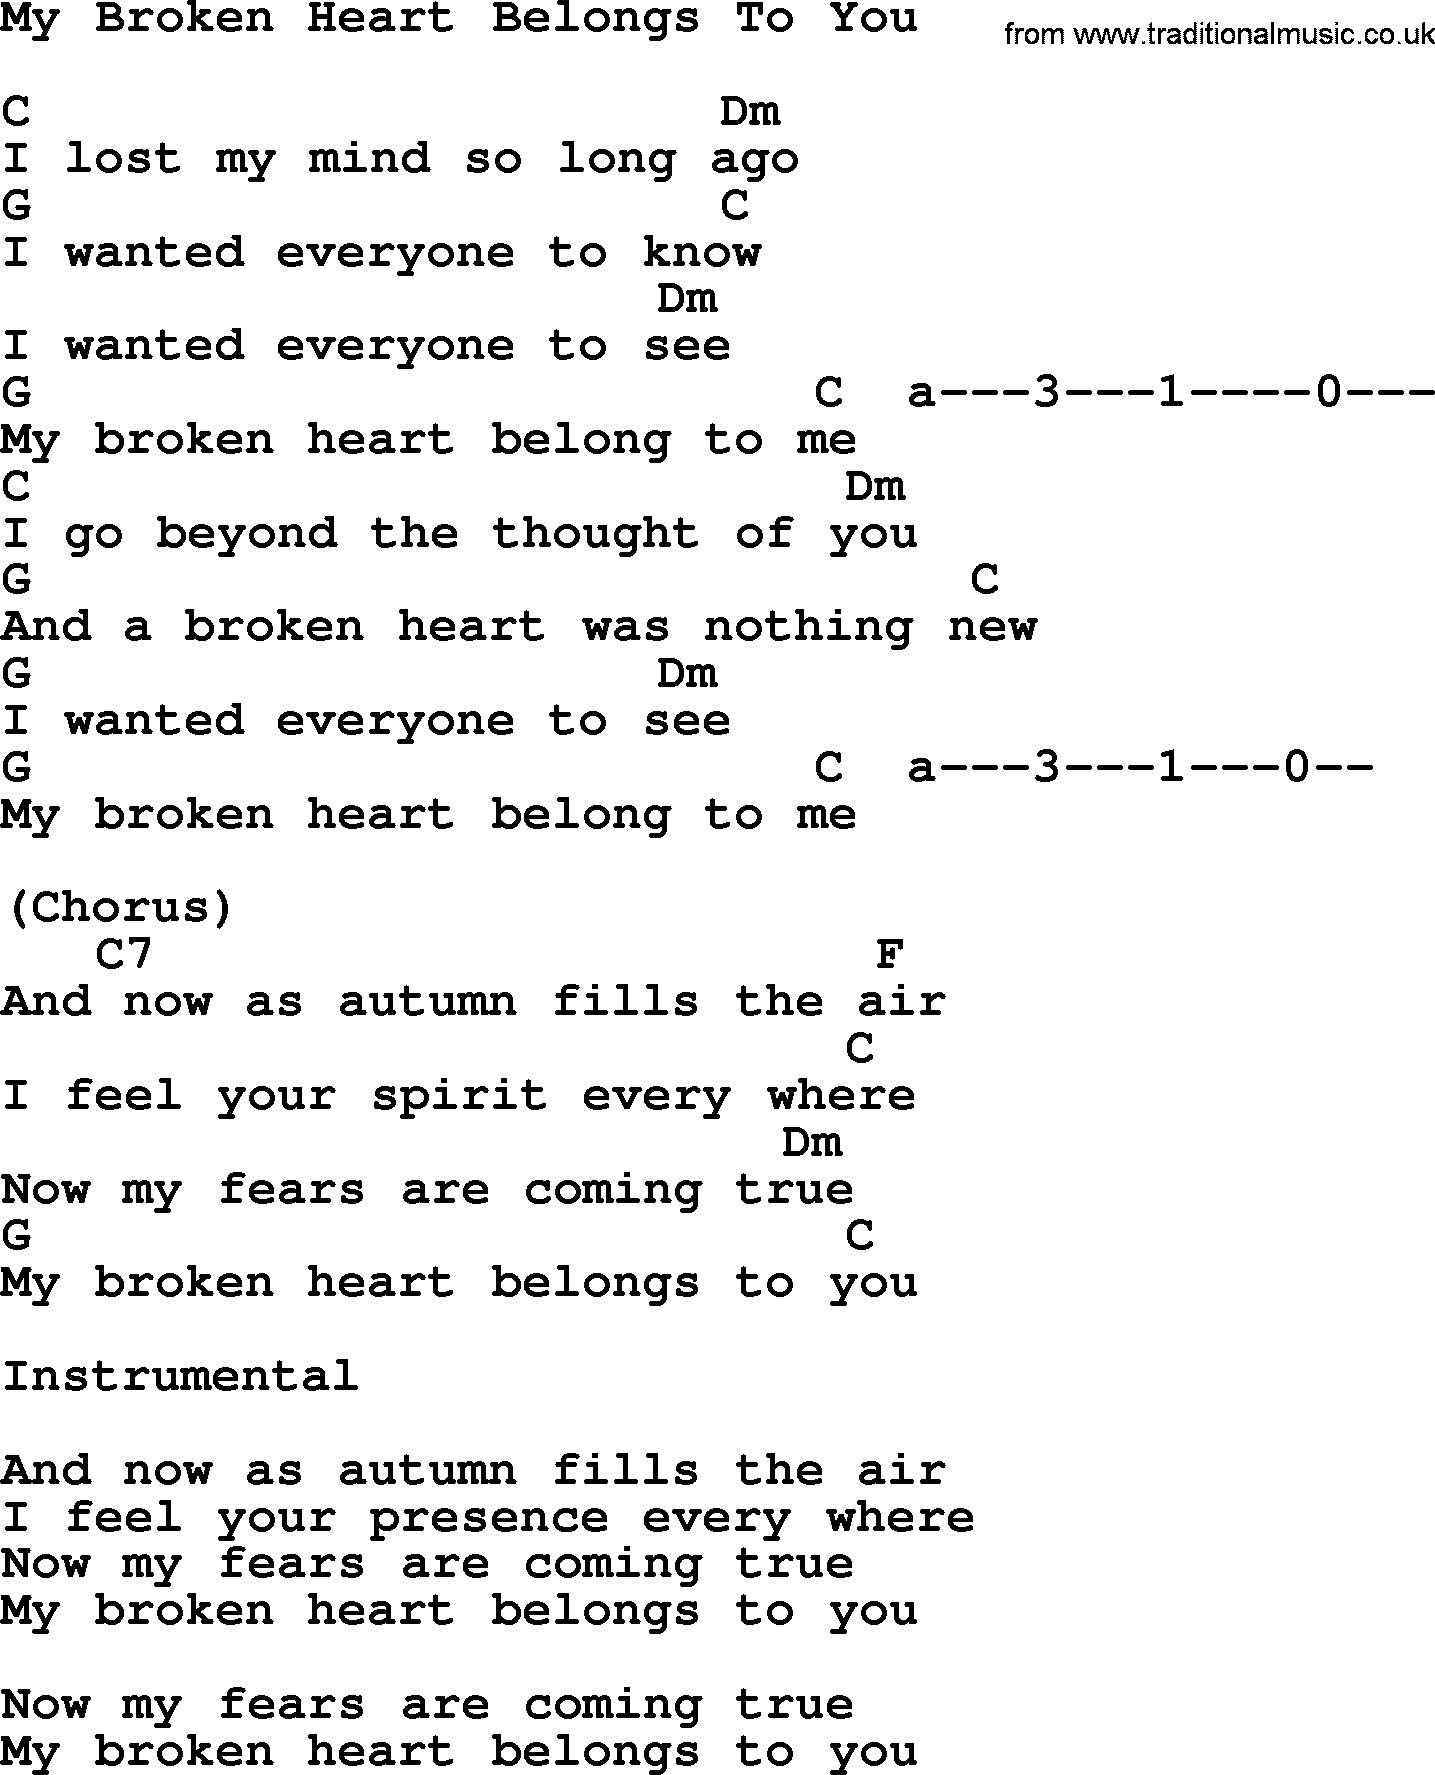 Willie Nelson song: My Broken Heart Belongs To You, lyrics and chords